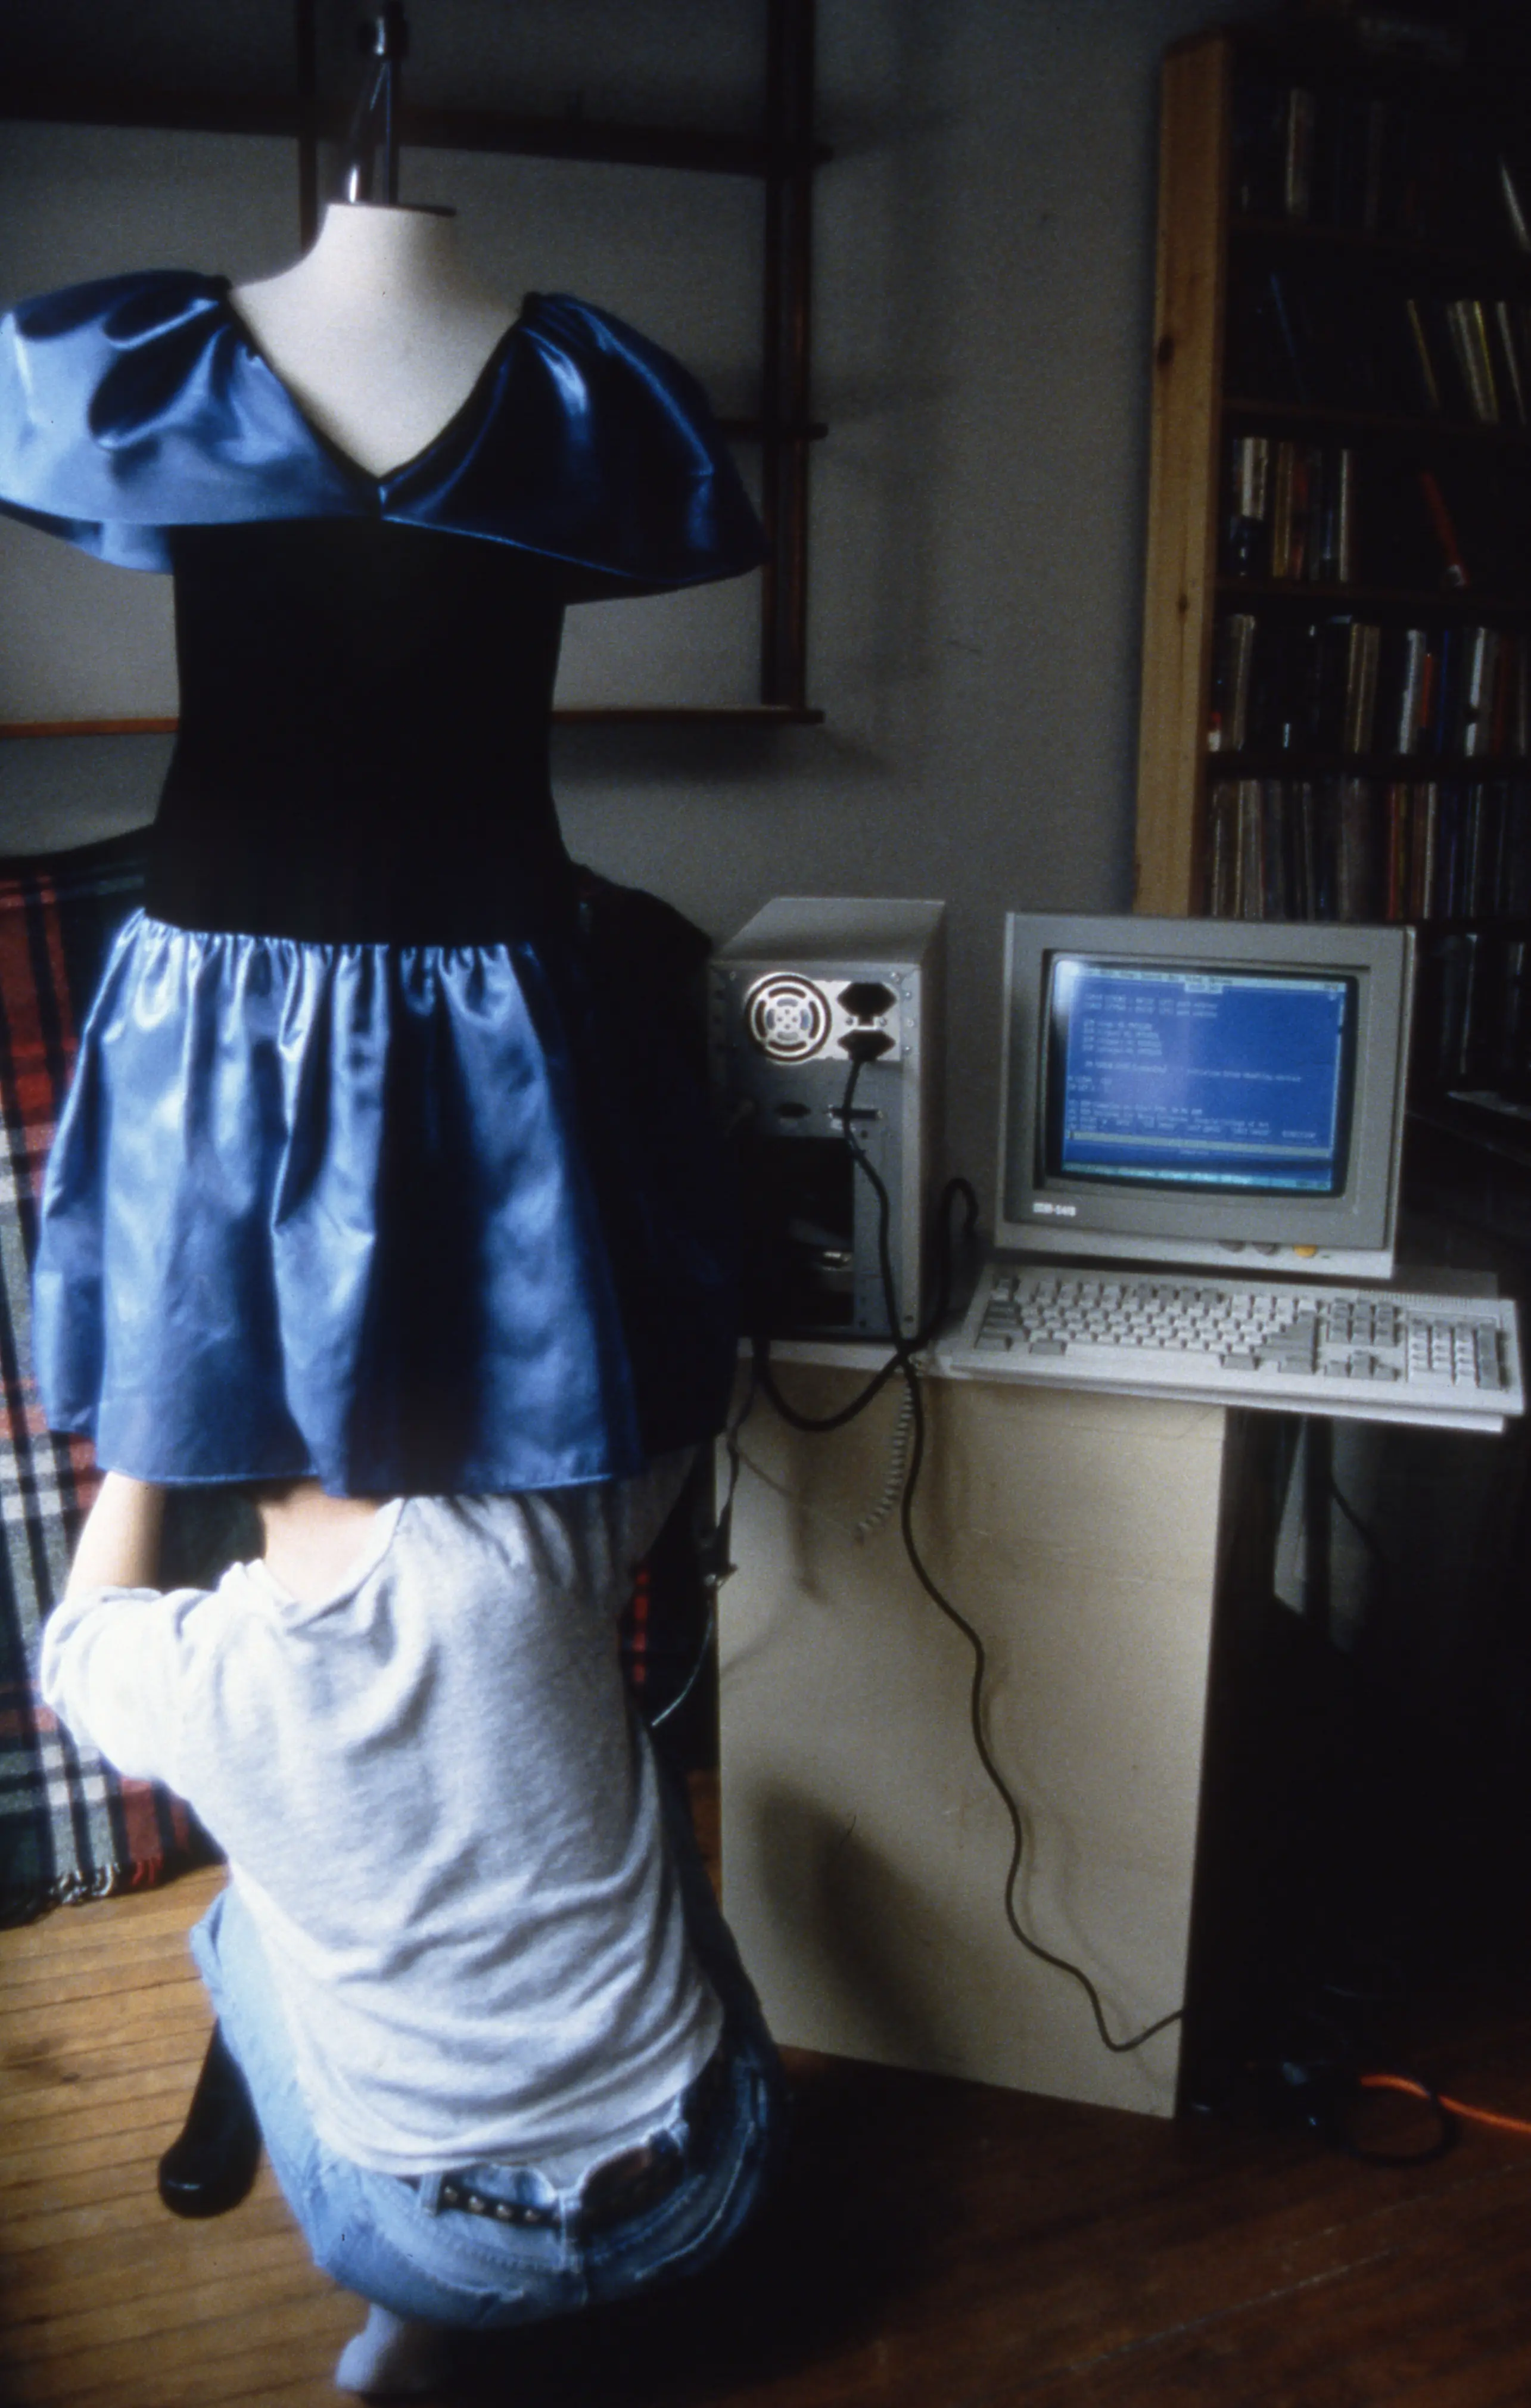 Photo of Nancy underneath the blue dress in her studio with old CRT monitor and keyboard in the background.